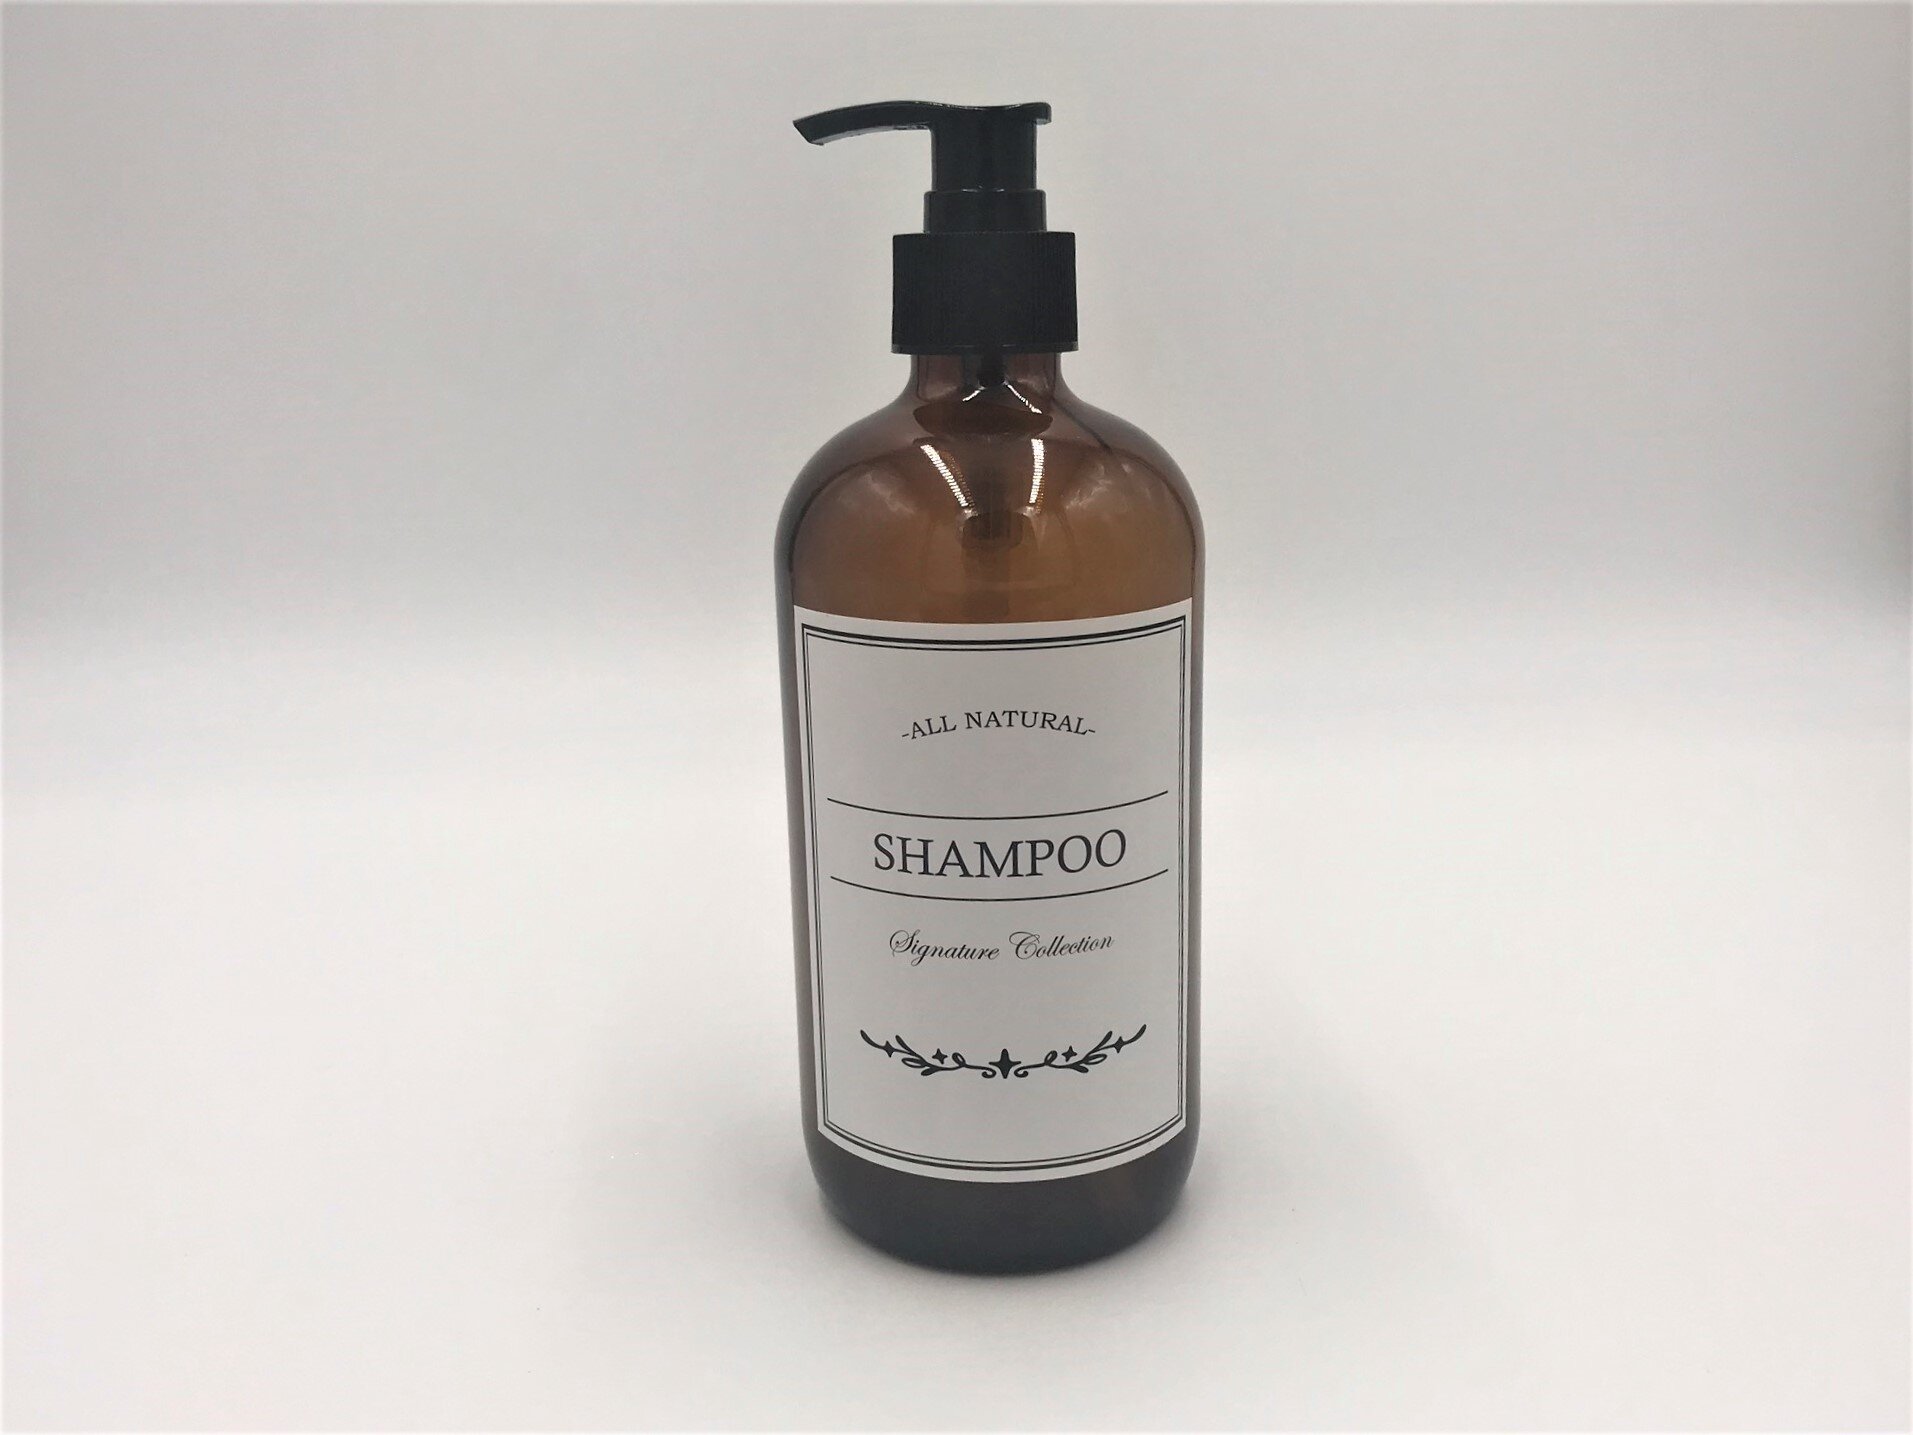 DIY shampoo  only takes seconds to make. Combine this recipe with a foaming pump for a shaving cream and shampoo 2-in-1.